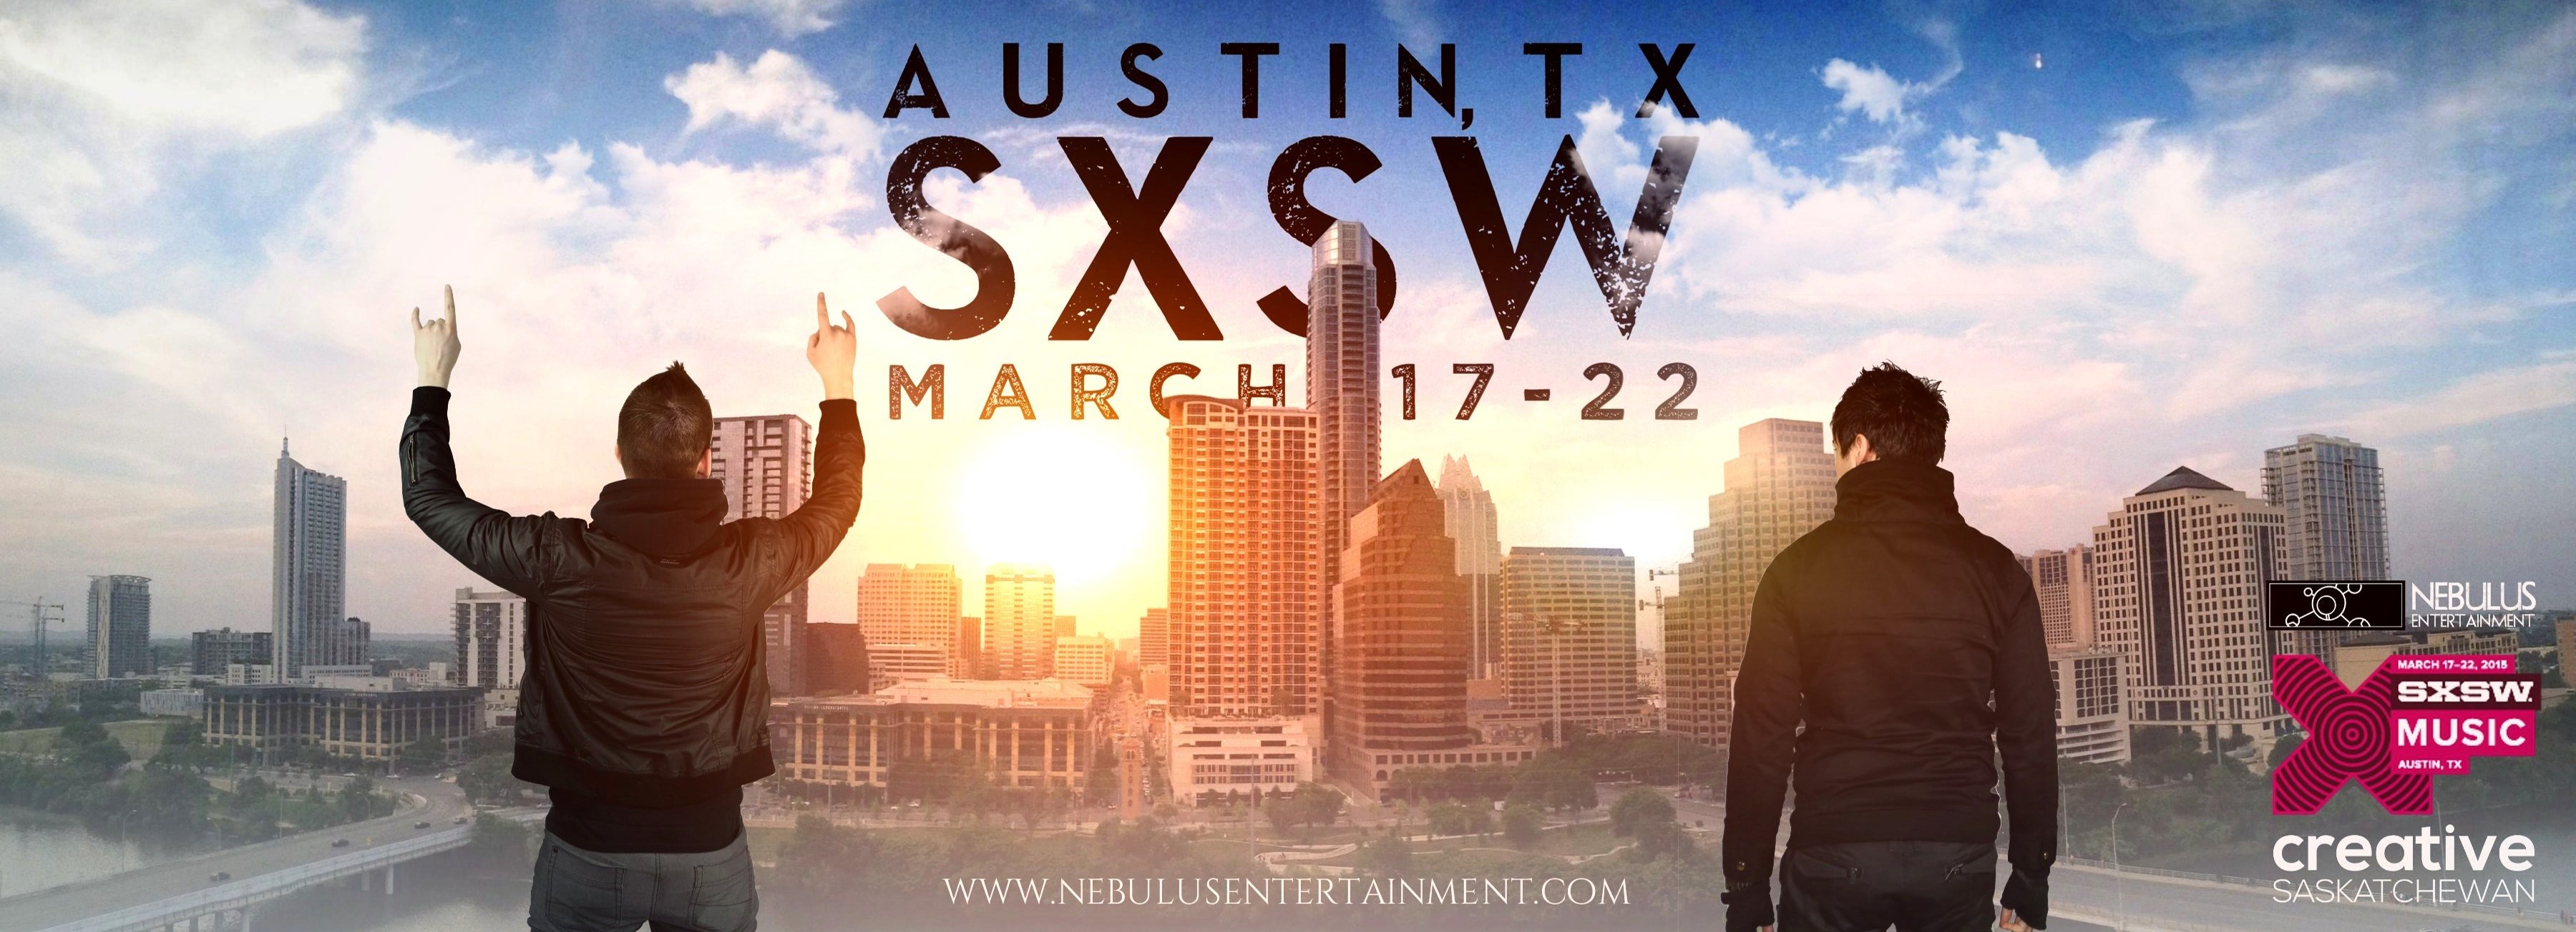 sxsw banner with light 2